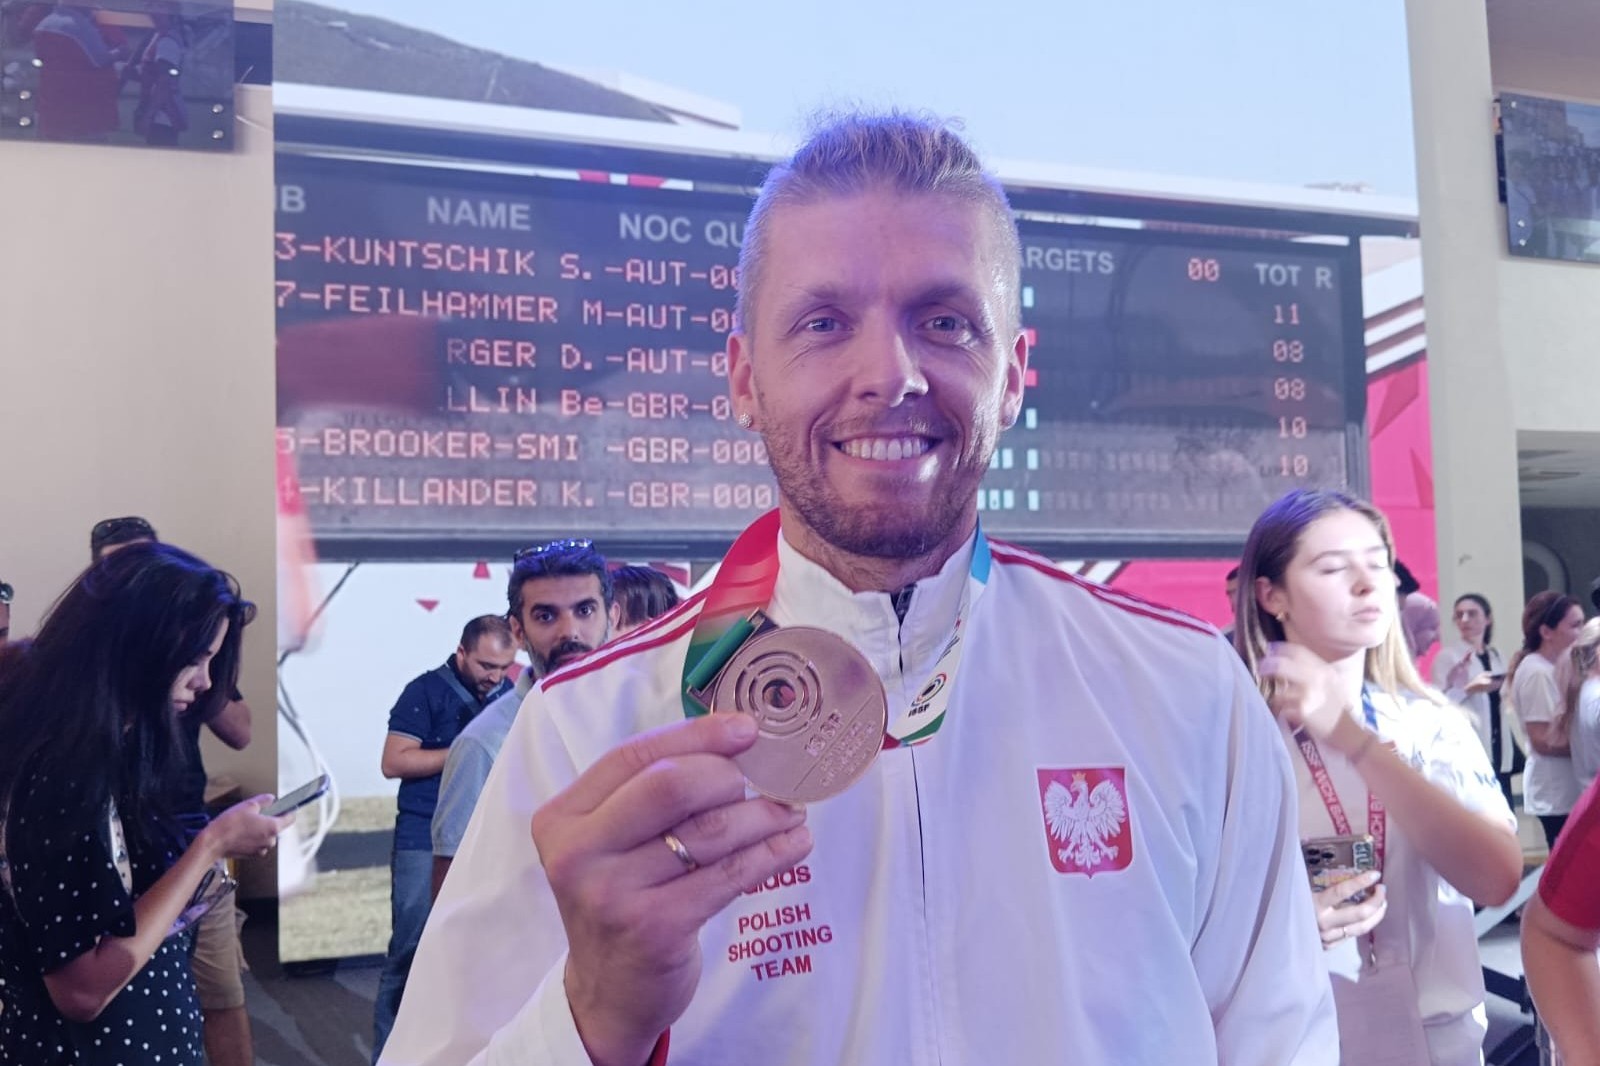 World shooting champion: “Everything was perfect from the start to the last day”